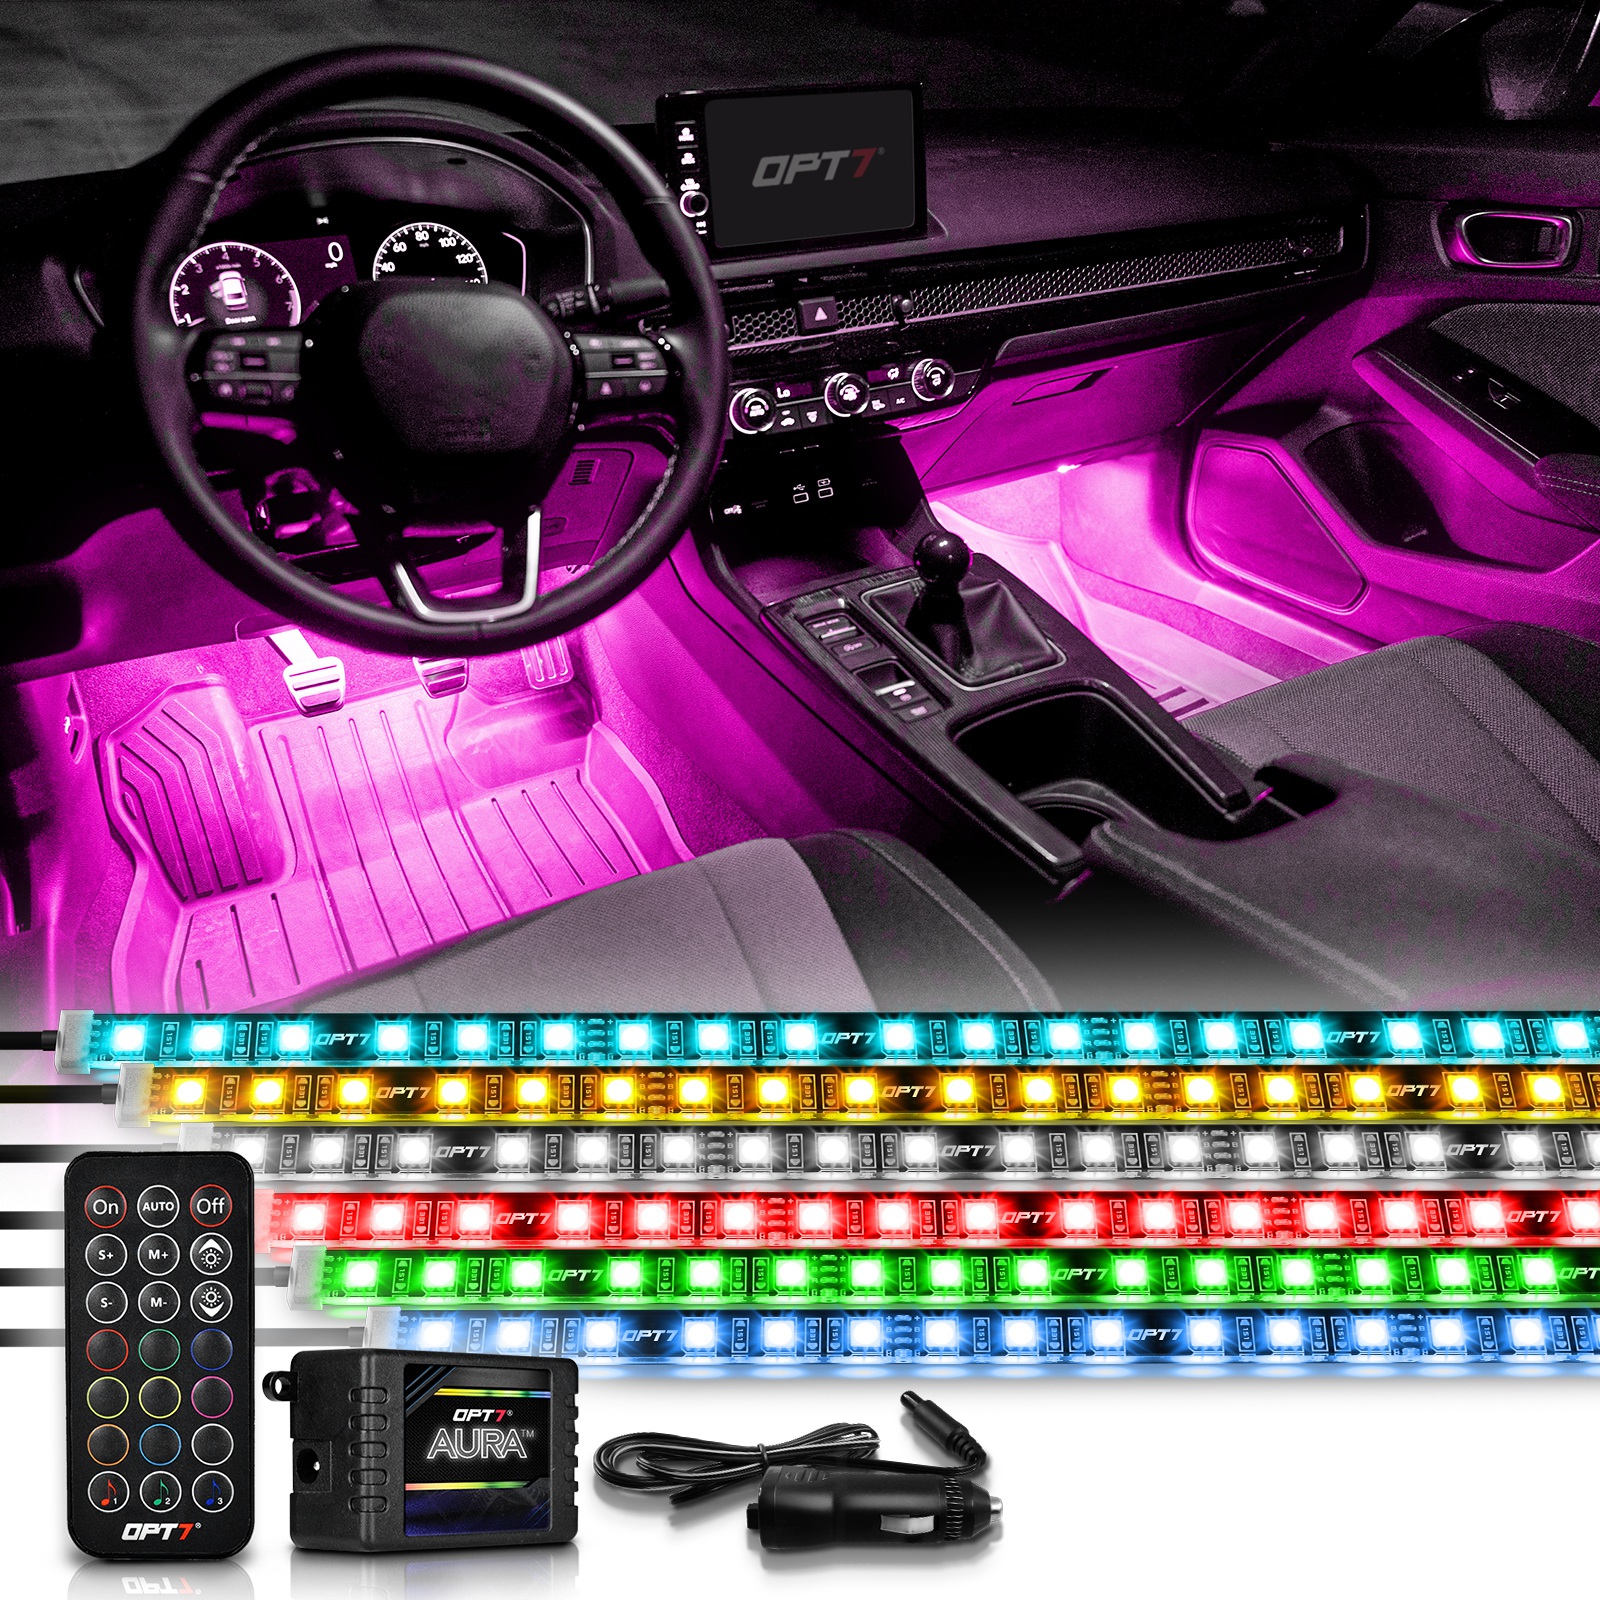 Opt7 Aura Interior Car Lights LED Strip Kit 16+ Smart Color, Soundsync, Show Patterns, and Remote Accent Underdash Footwell Floor, 4pc Single Row